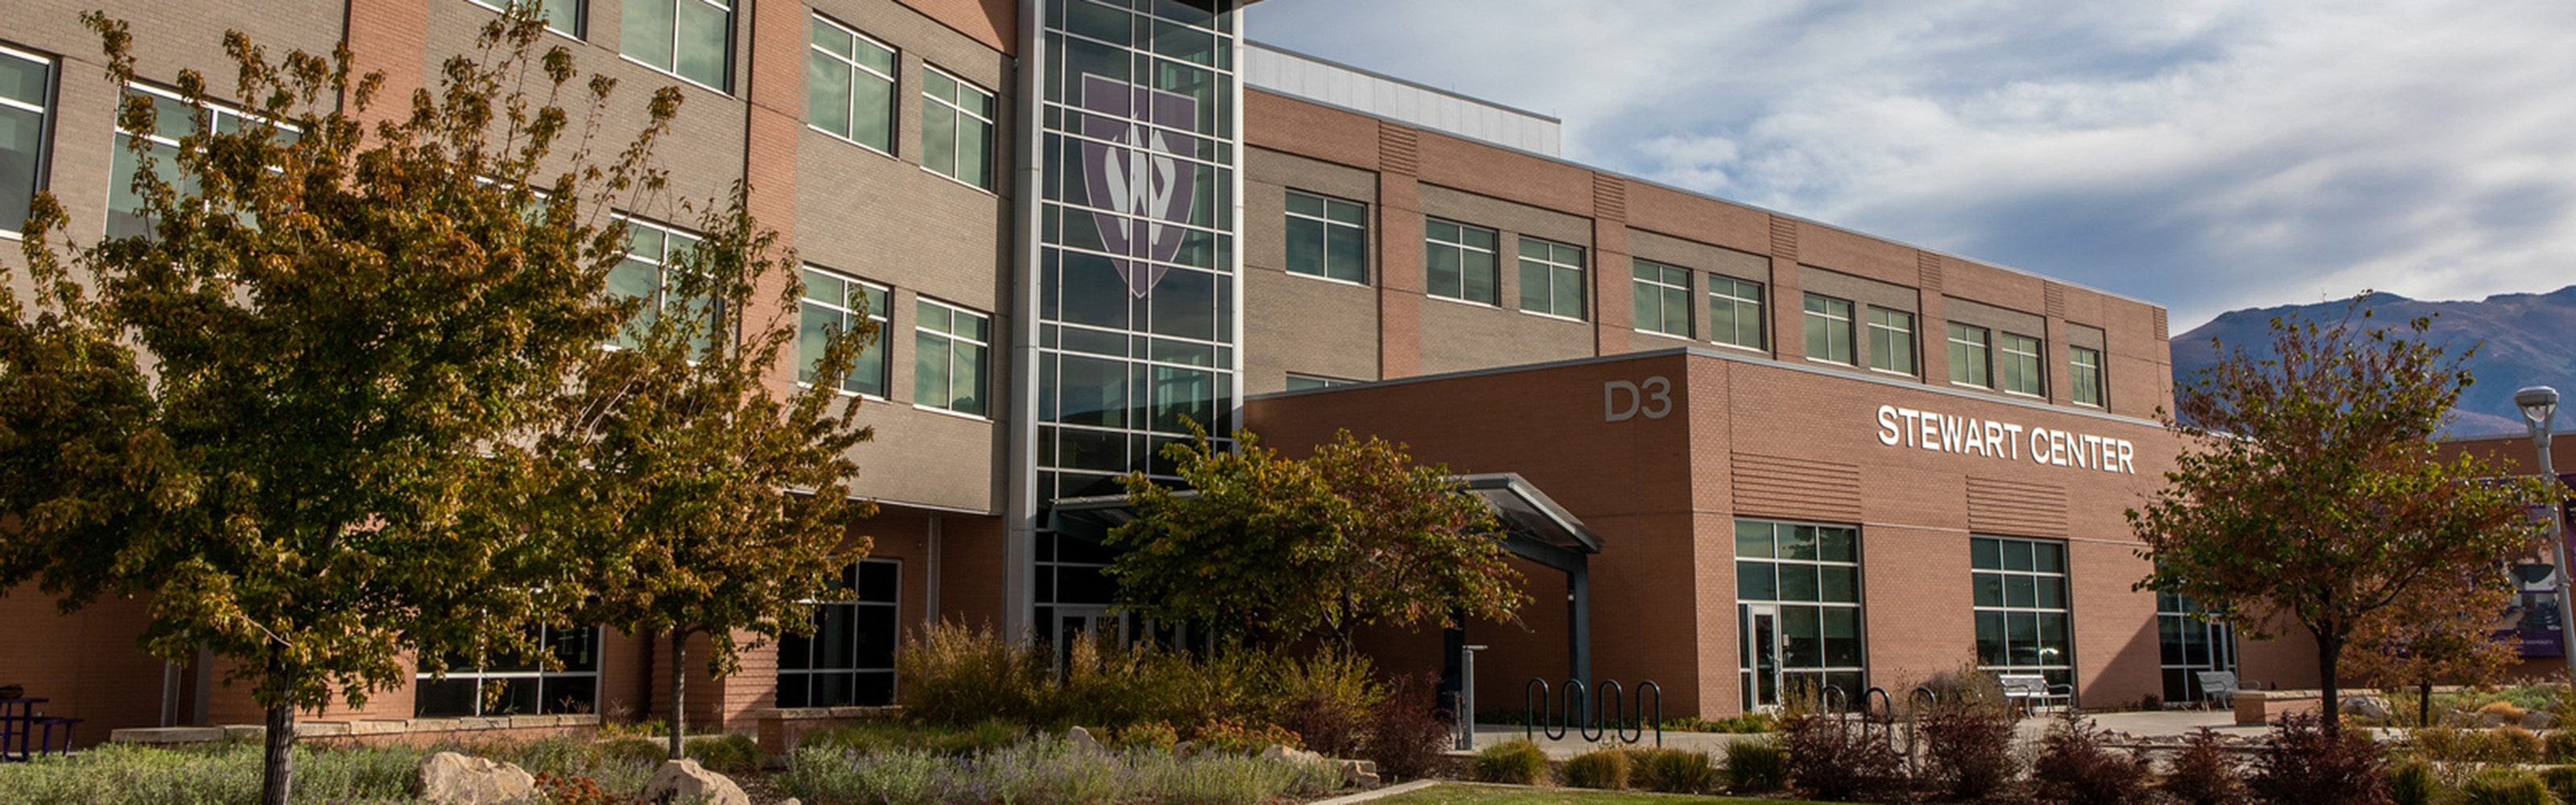 weber state construction, interior design and architecture